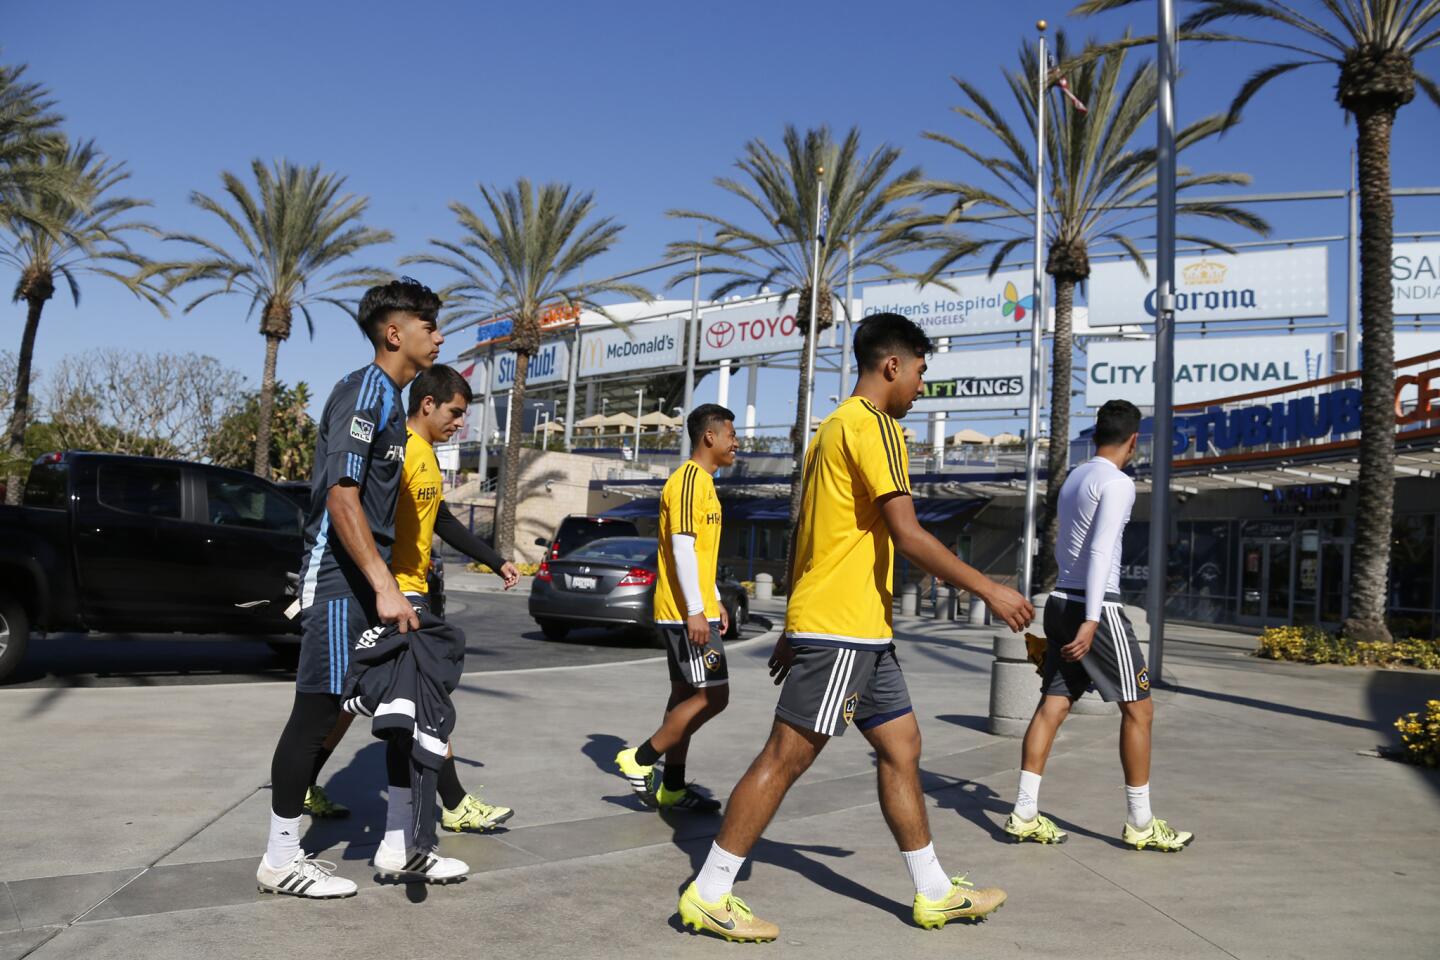 At the Galaxy's school, soccer is hardly the only subject